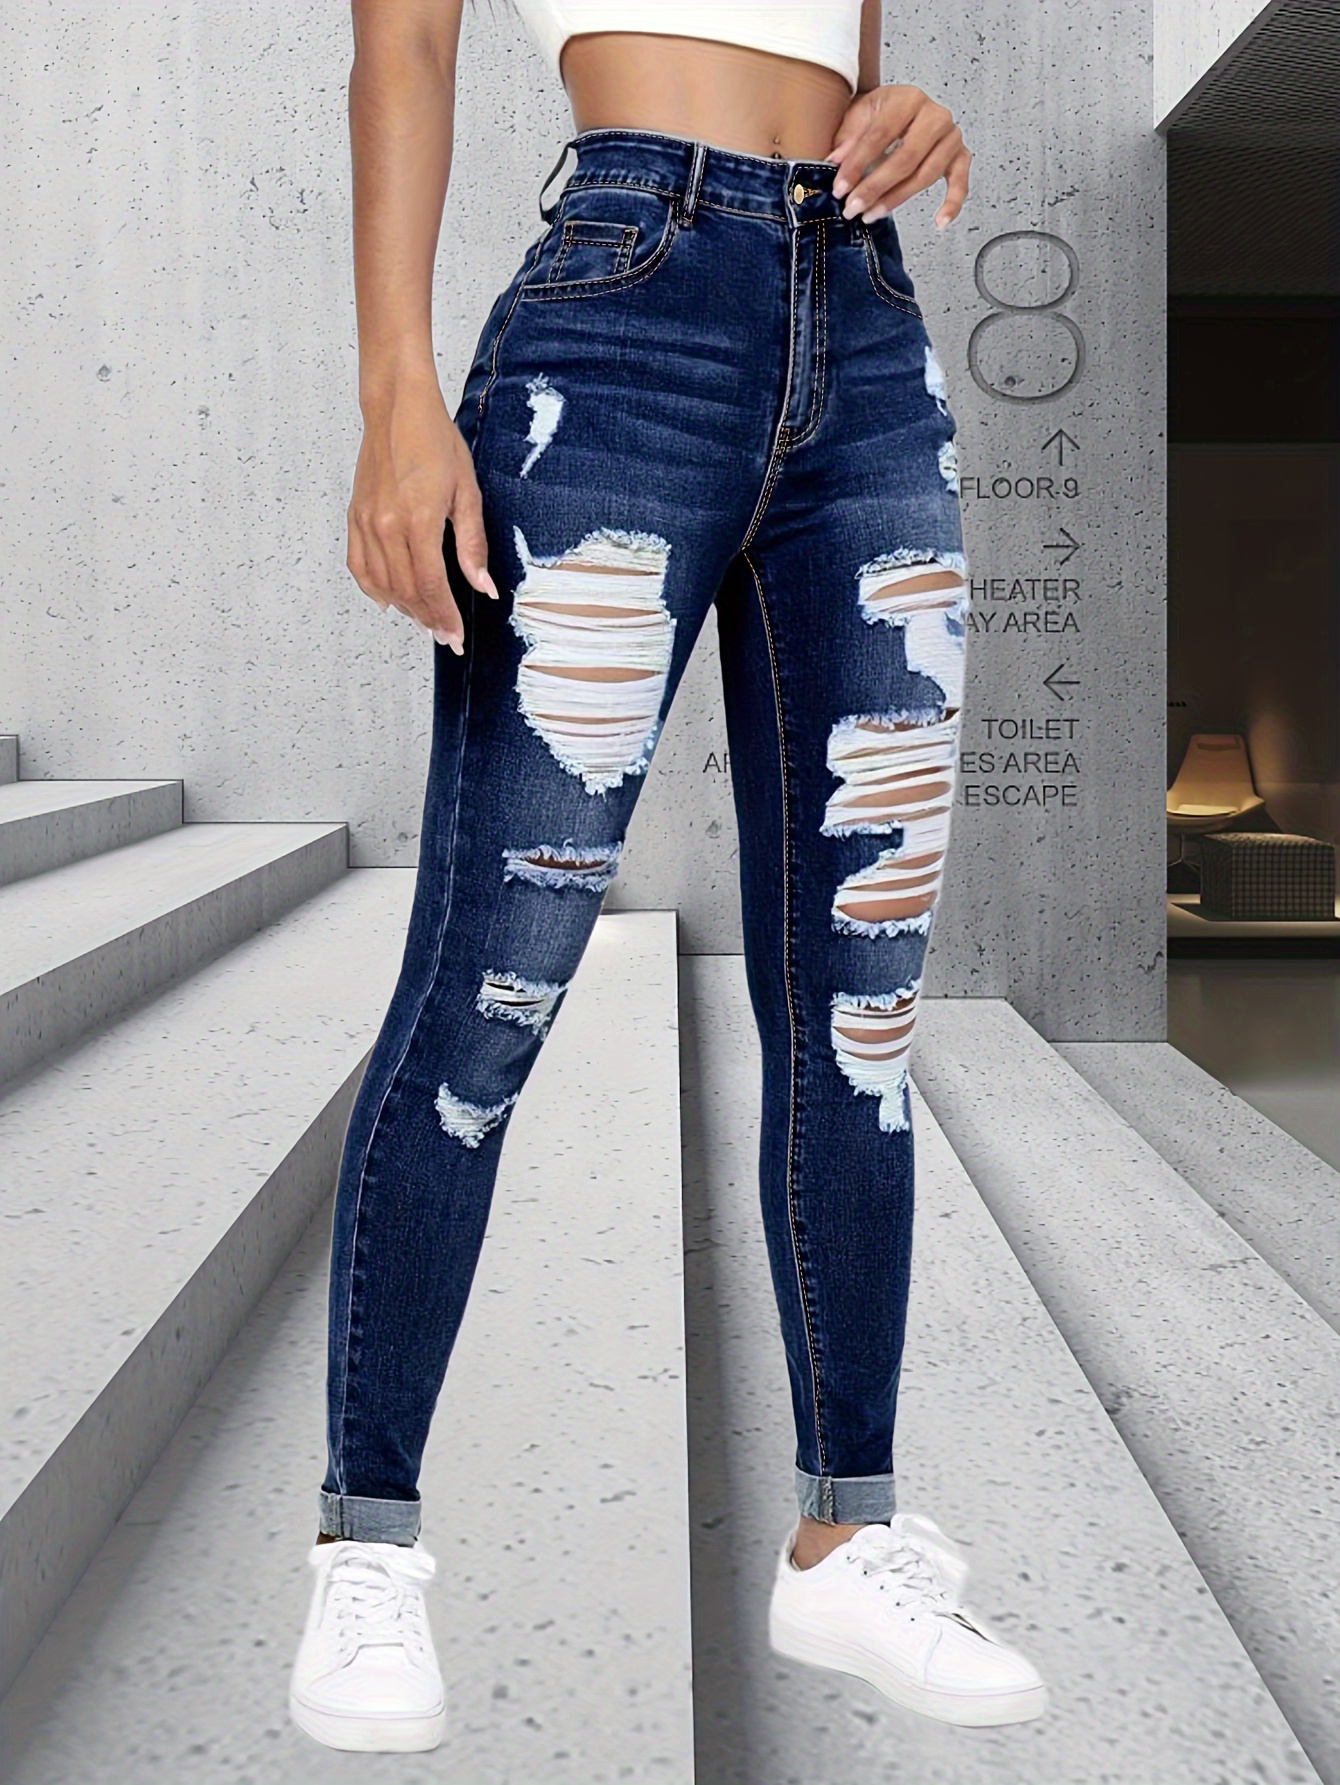 Girls' Jeans: Ripped, Skinny & High Waisted Jeans for Girls